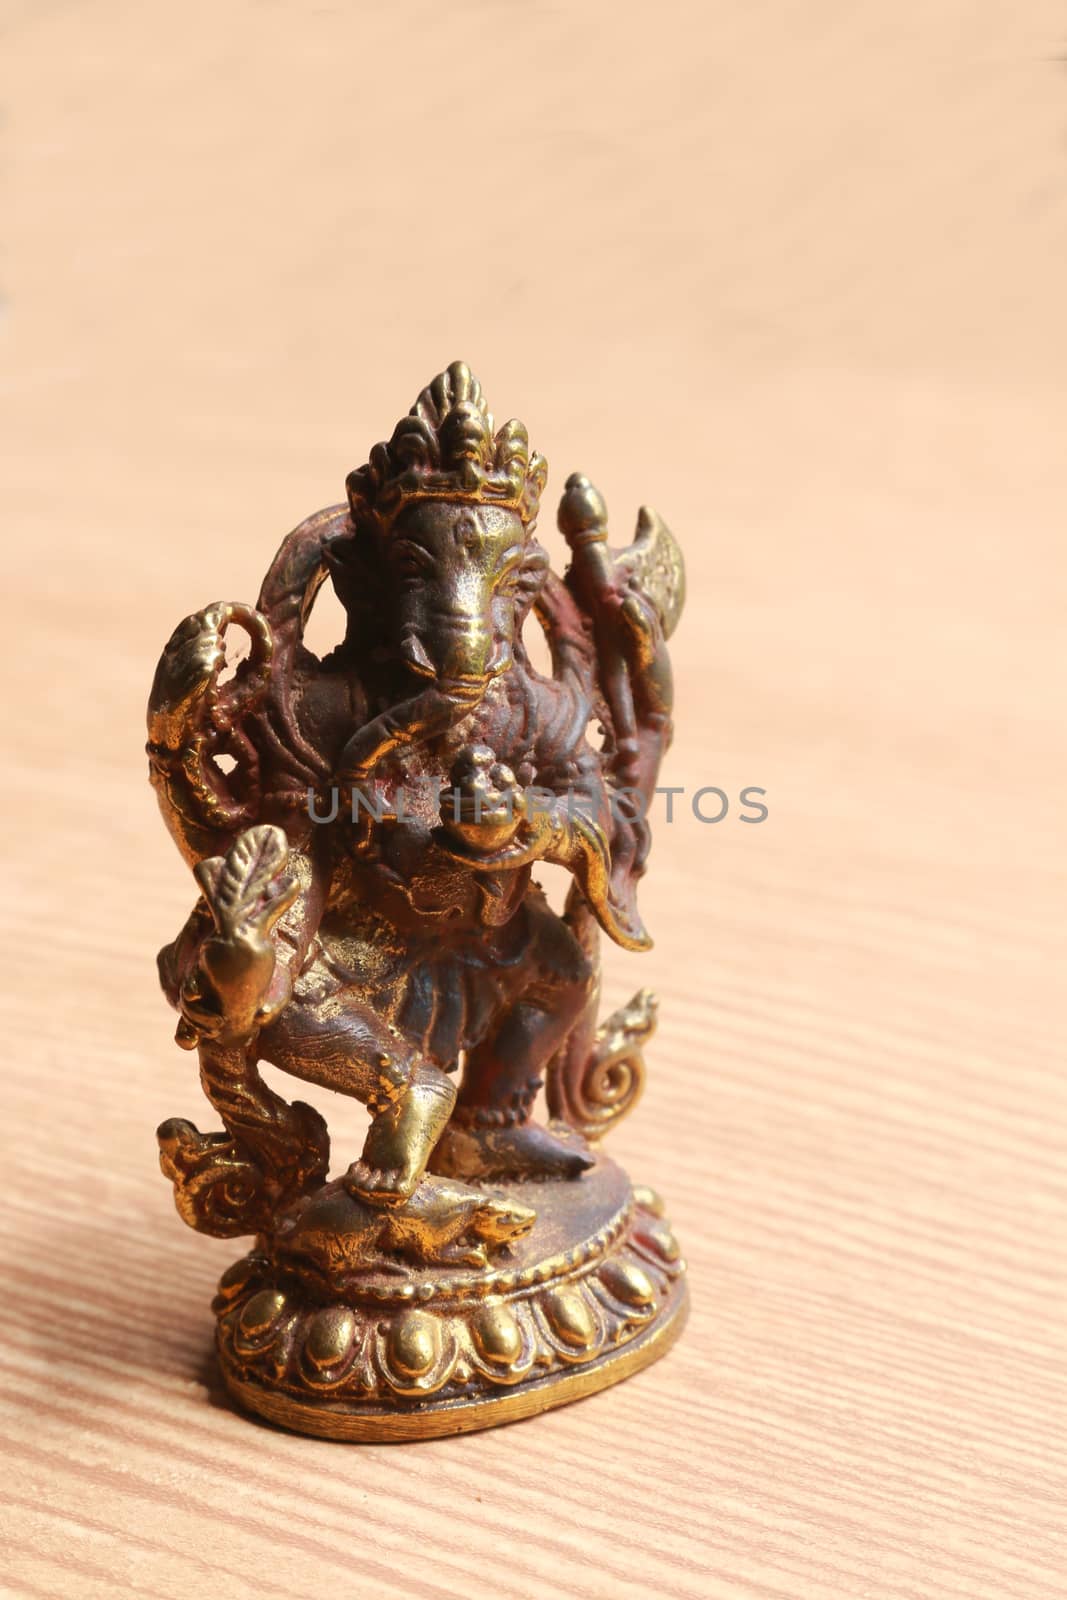 sculpture of Ganesha by kaidevil